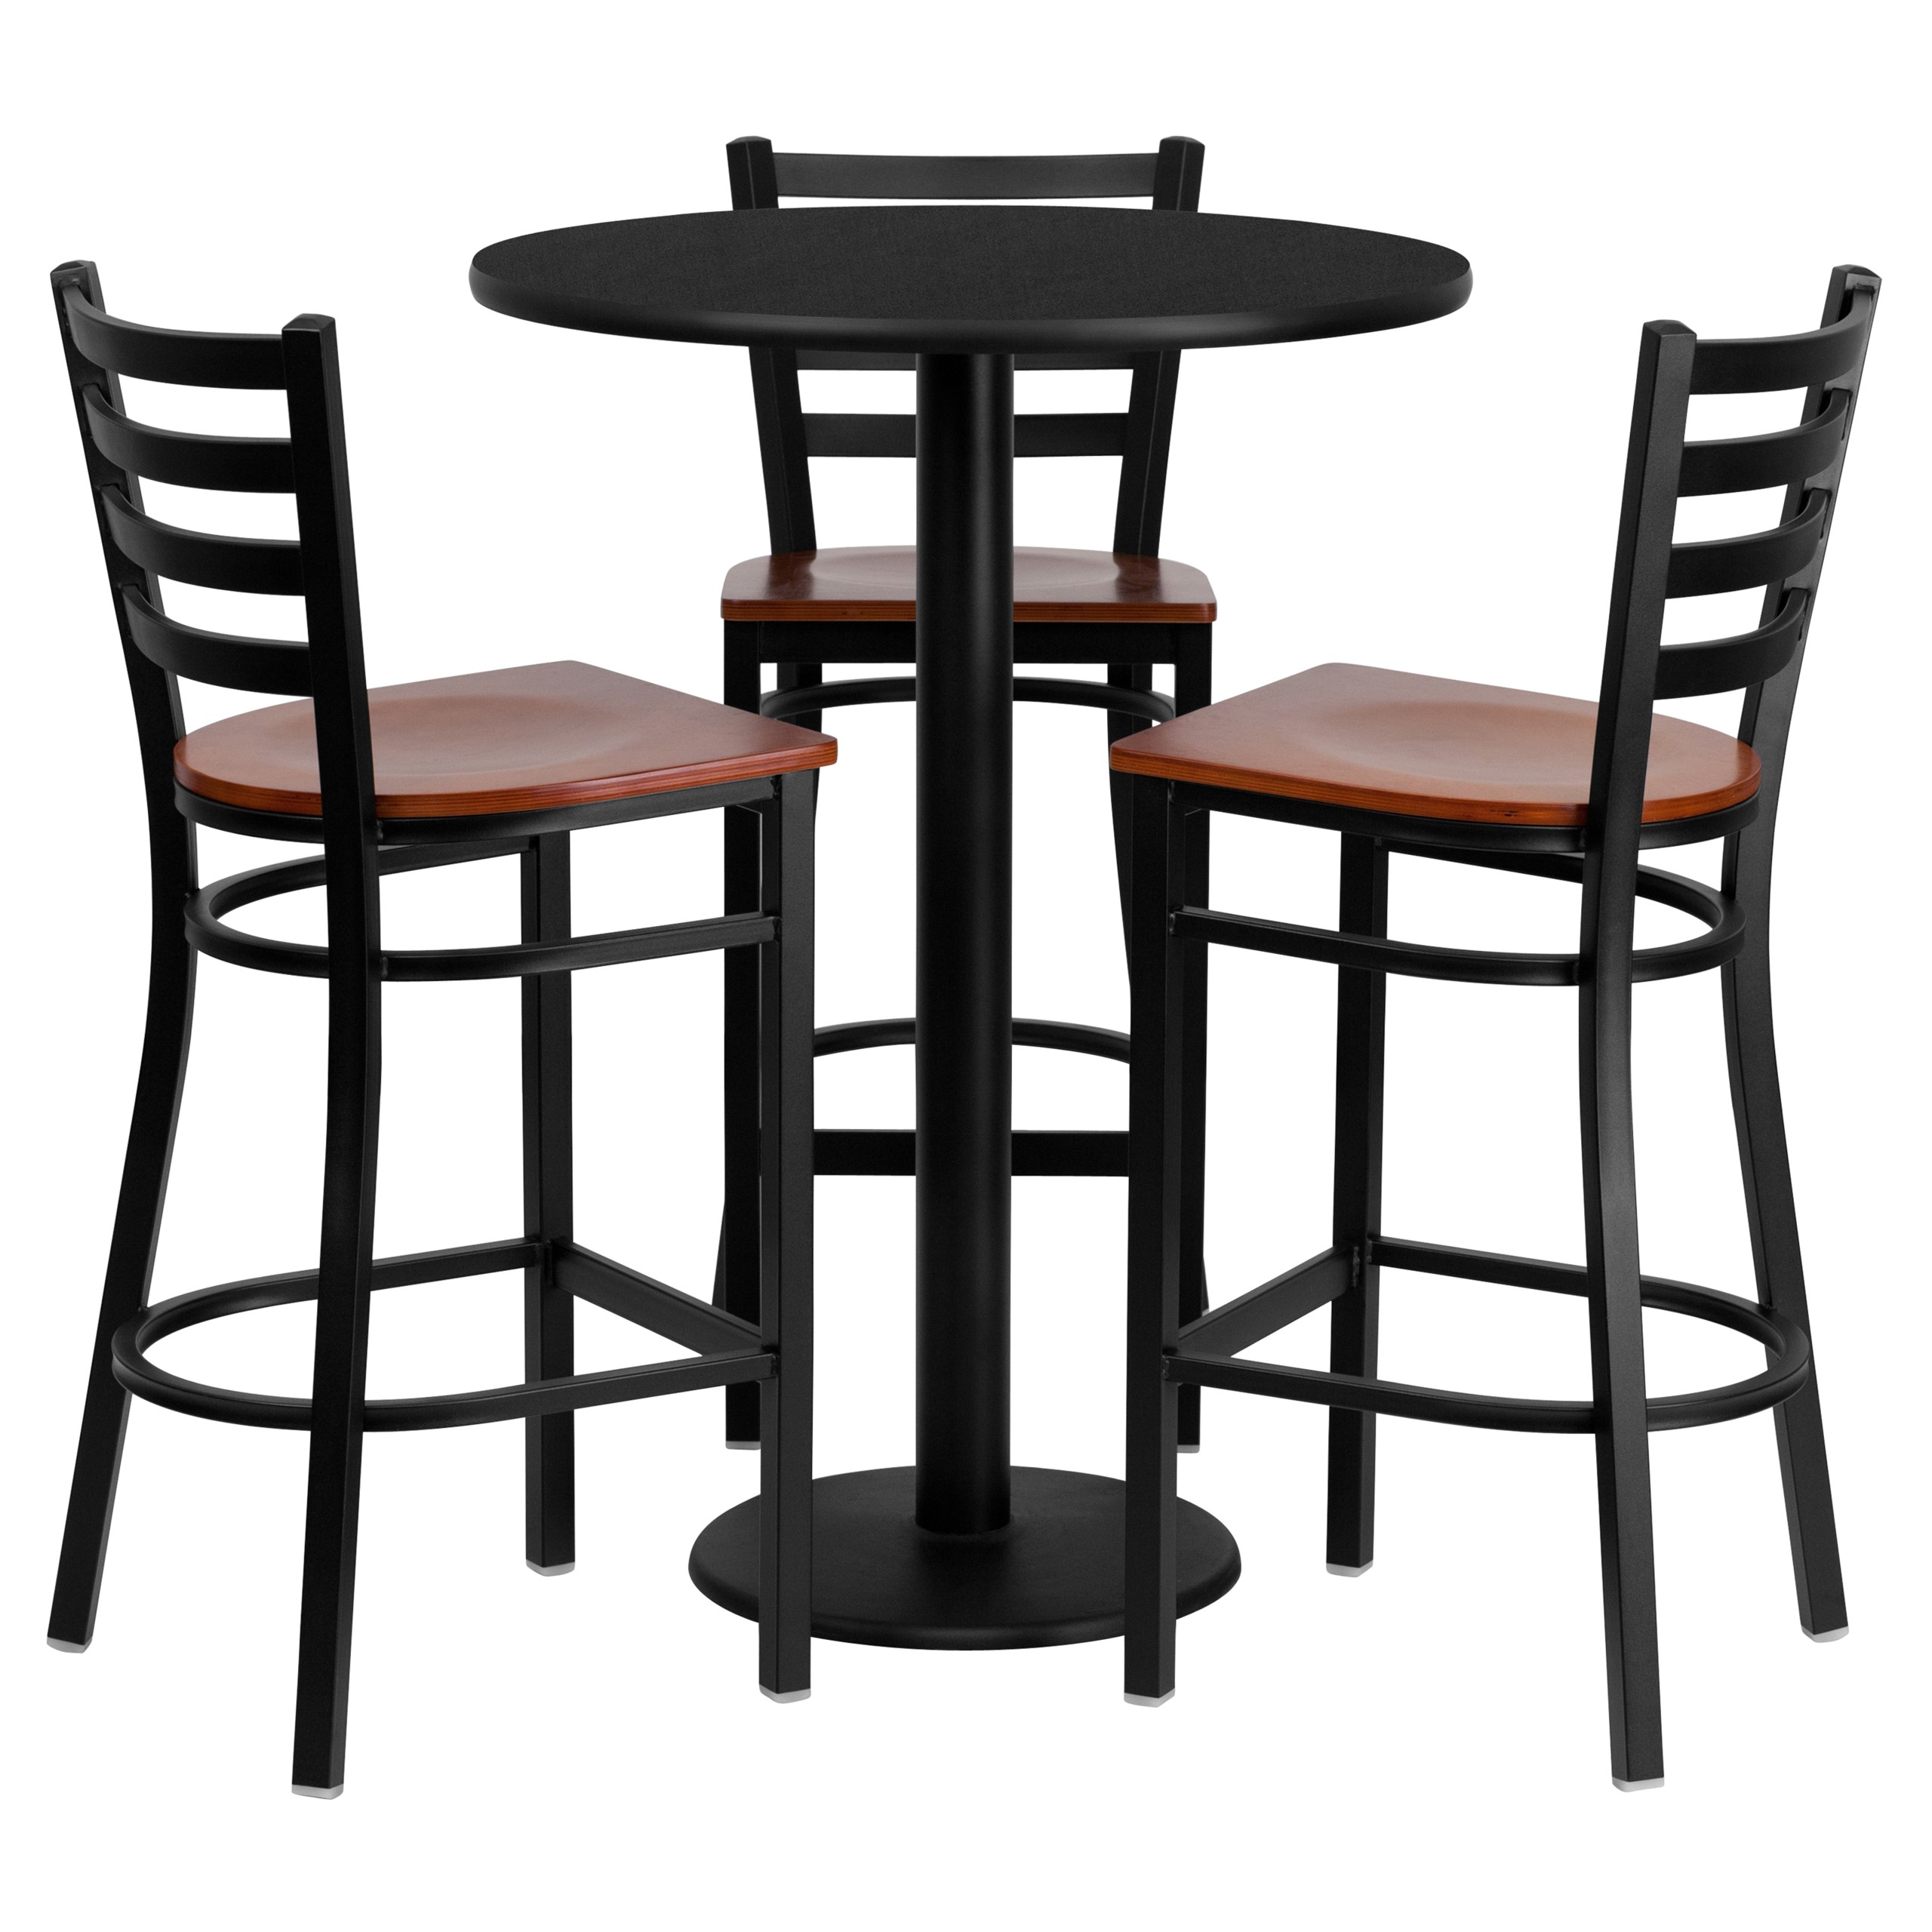 Pub Tables And Chairs For Sale - Ideas on Foter